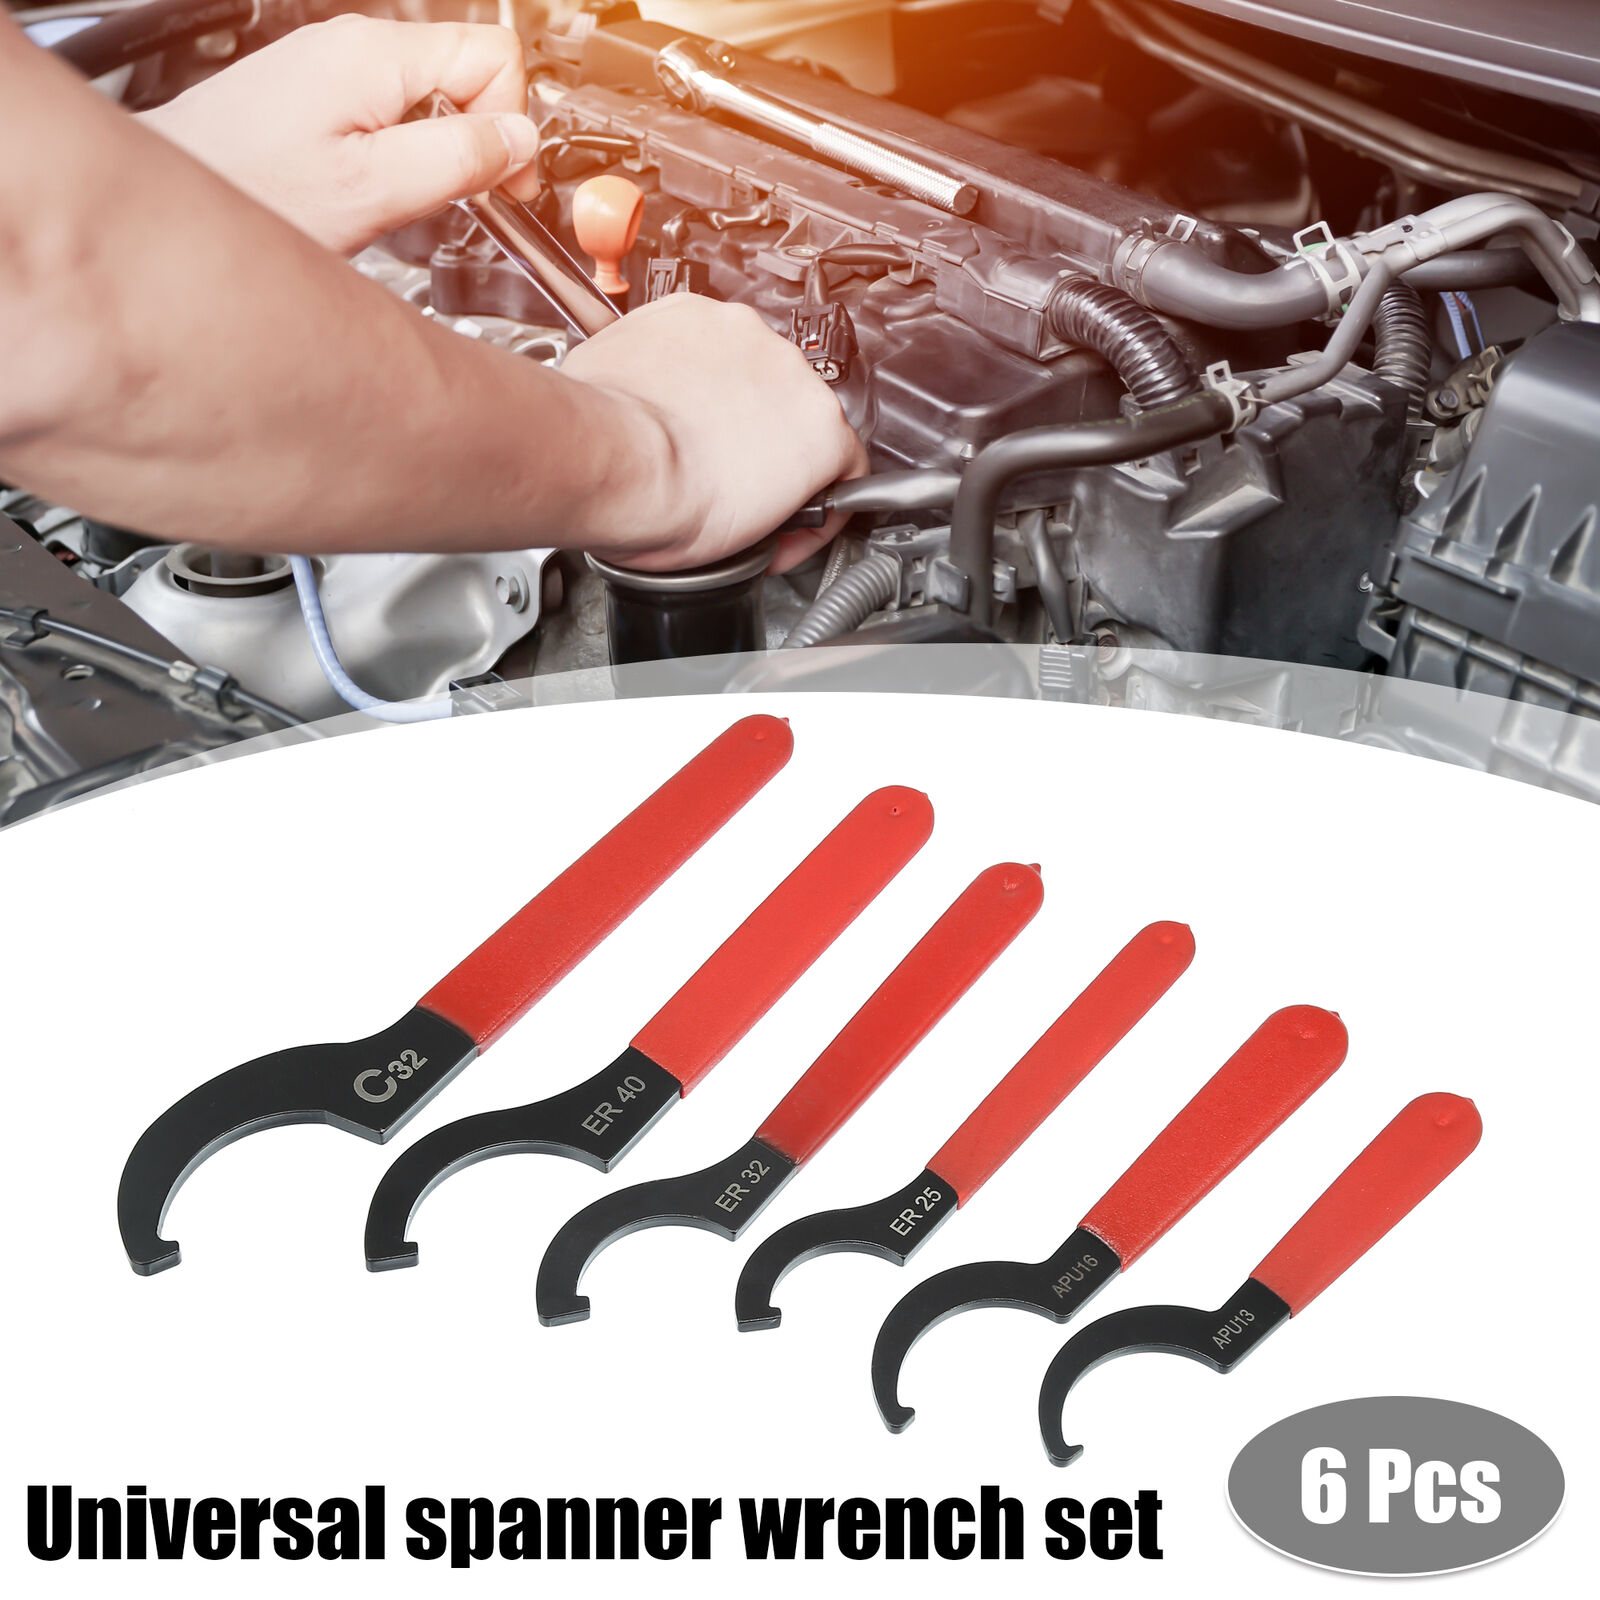 6pcs Coil Over Wrench Shock Spanner Universal Adjustable C Shape Wrenches Tool